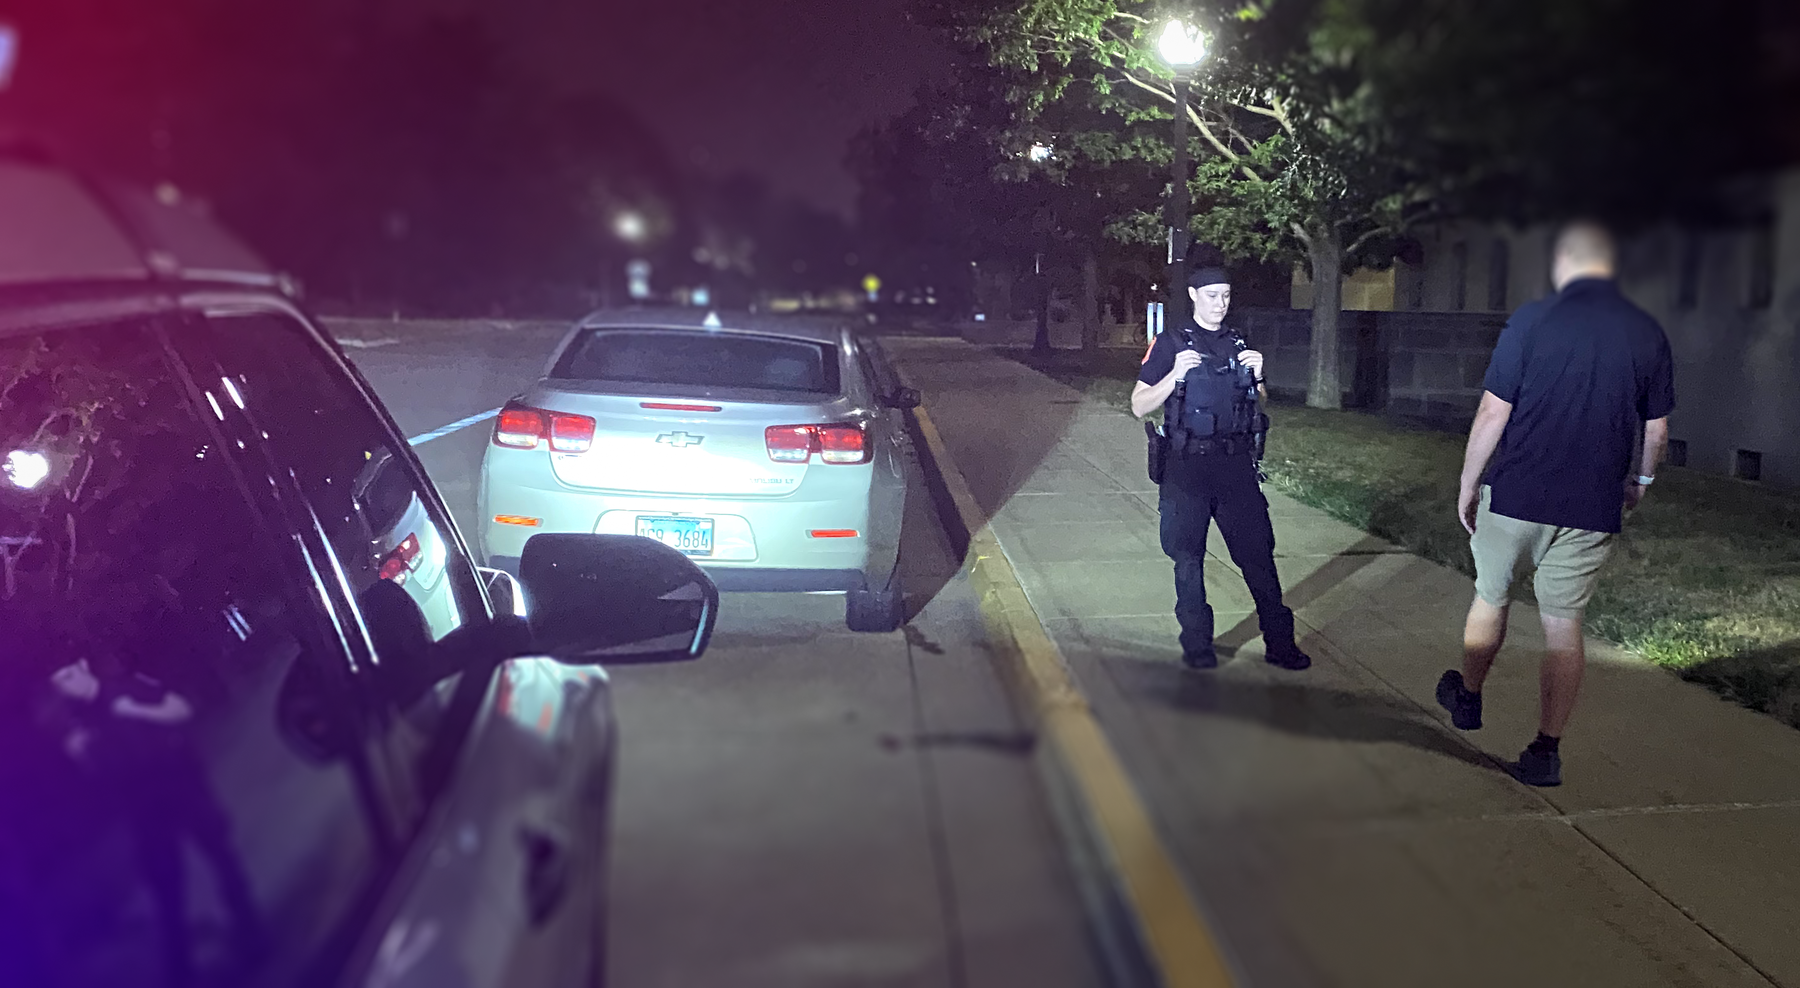 Two officers stand beside a person, whom we see from behind, attempting to walk a straight line. A police vehicle with red and blue lights is shown at the edge of the image.